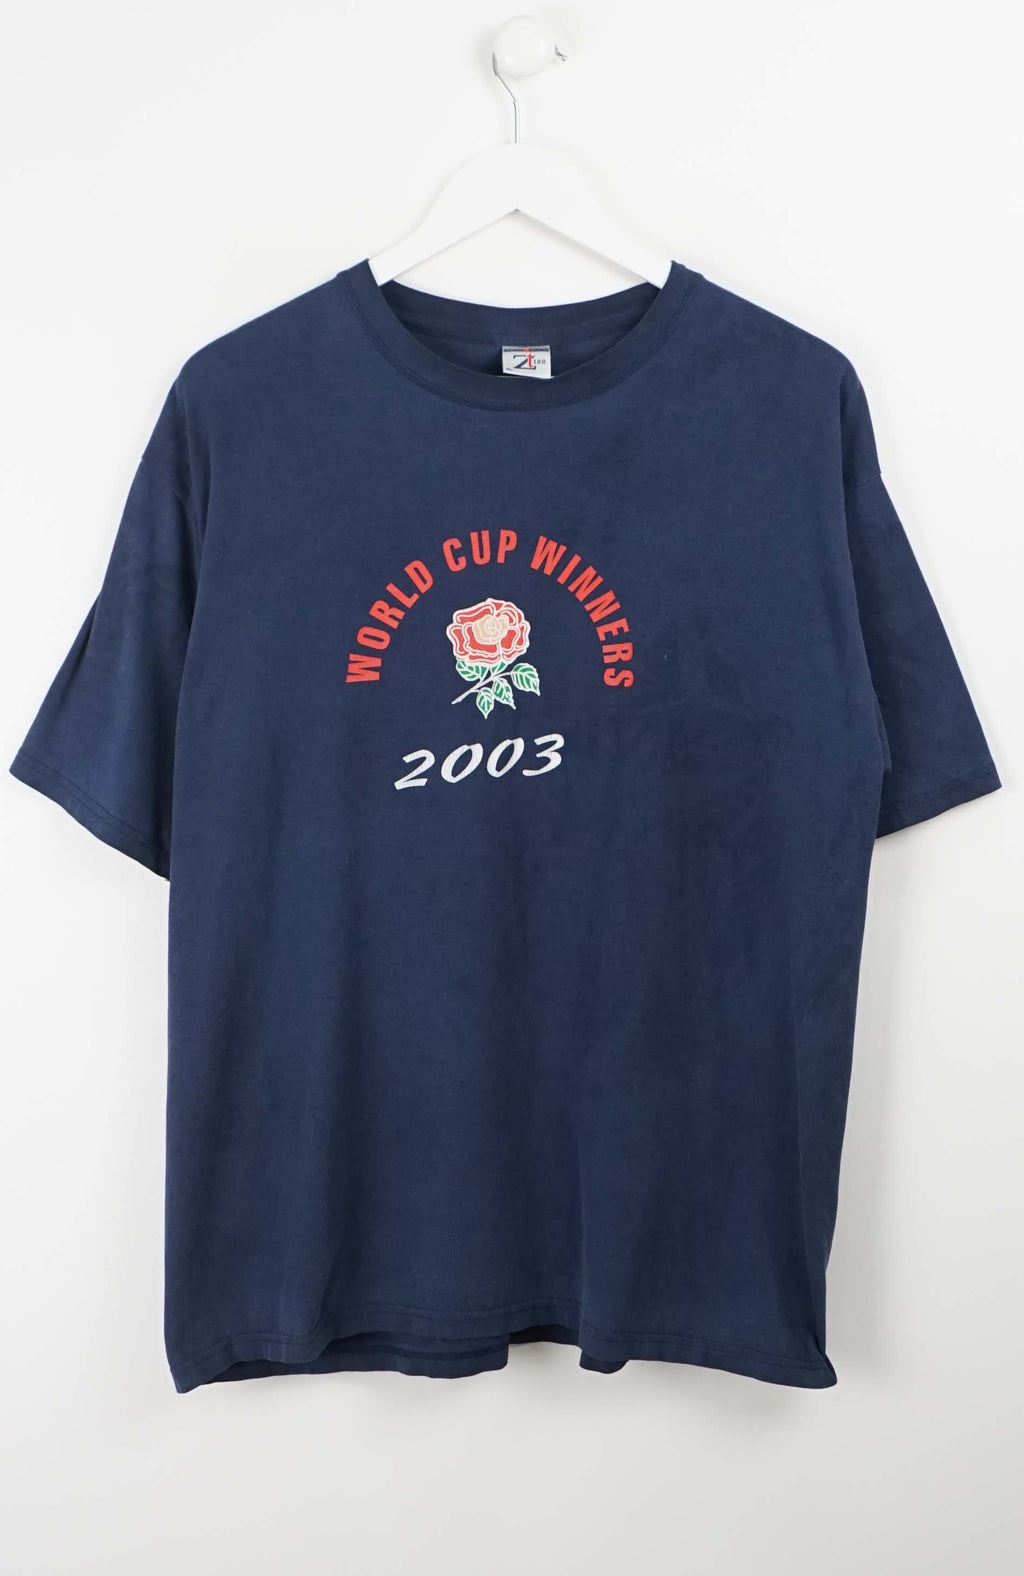 VINTAGE ENGLAND RUGBY WORLD CUP 2003 T-SHIRT (M)